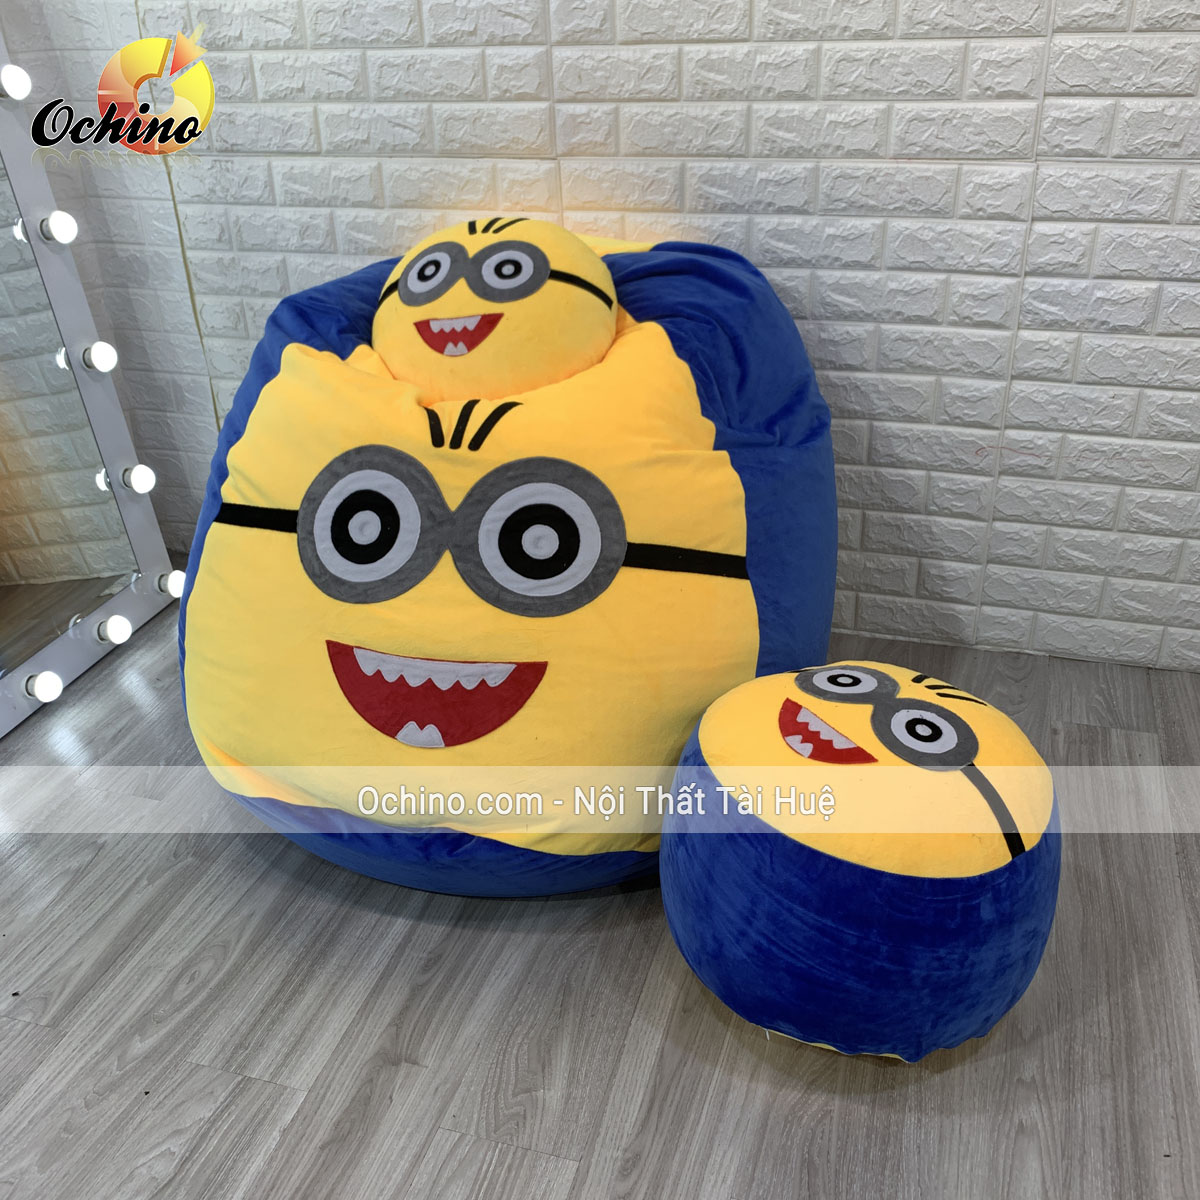 Buy Yellow & Blue Minion Pattarn Printed Small Backpack Online in India at  Bewakoof